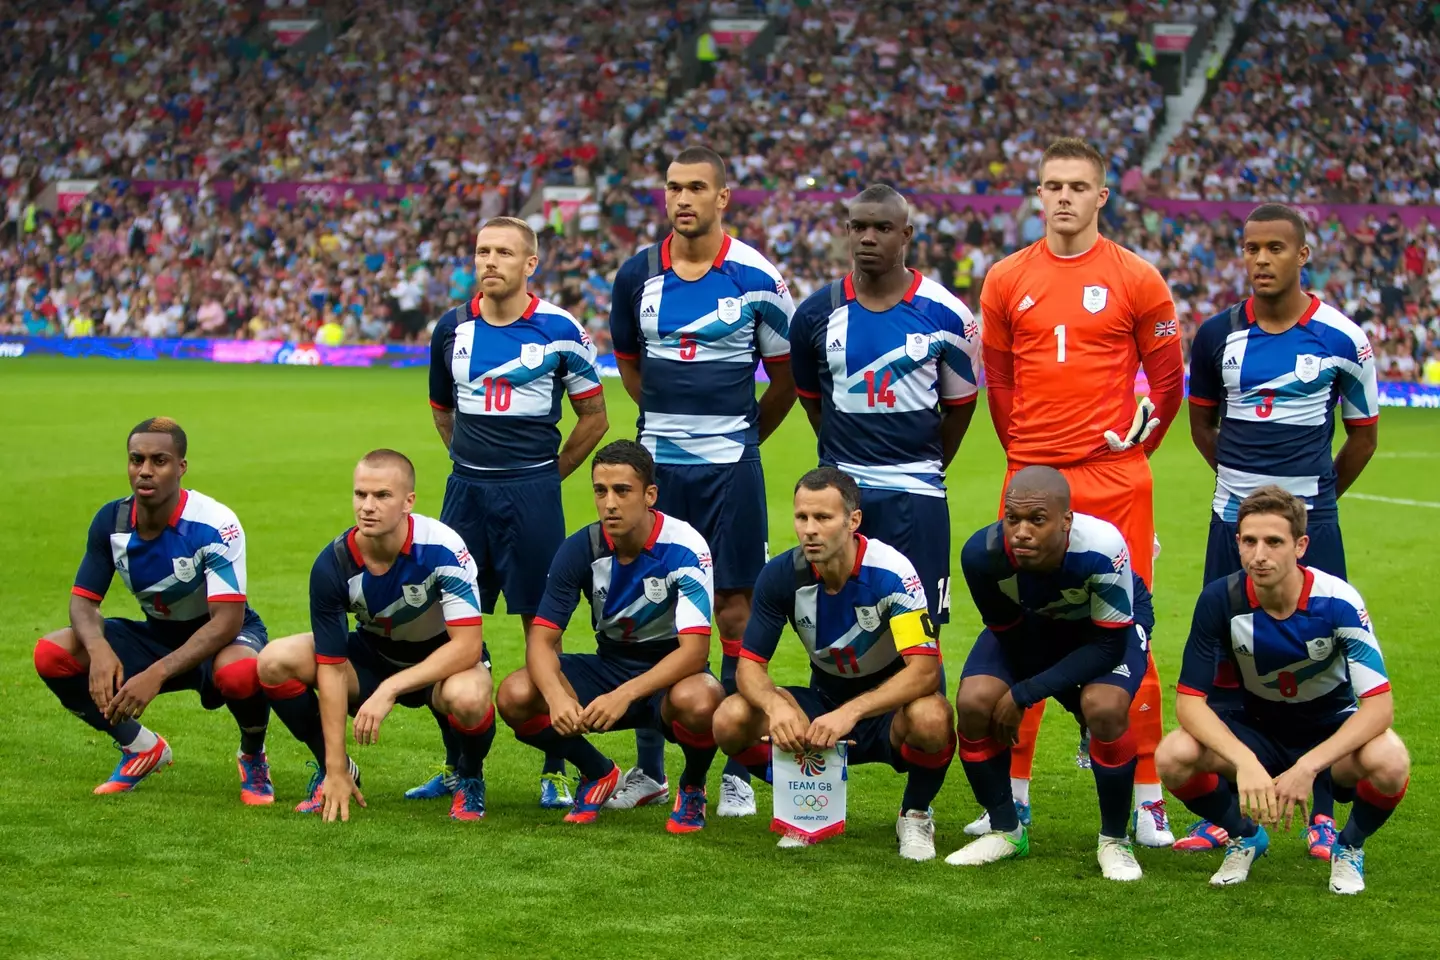 Team GB competed in football at the Olympics for the first time since 1974 (Image: Alamy)